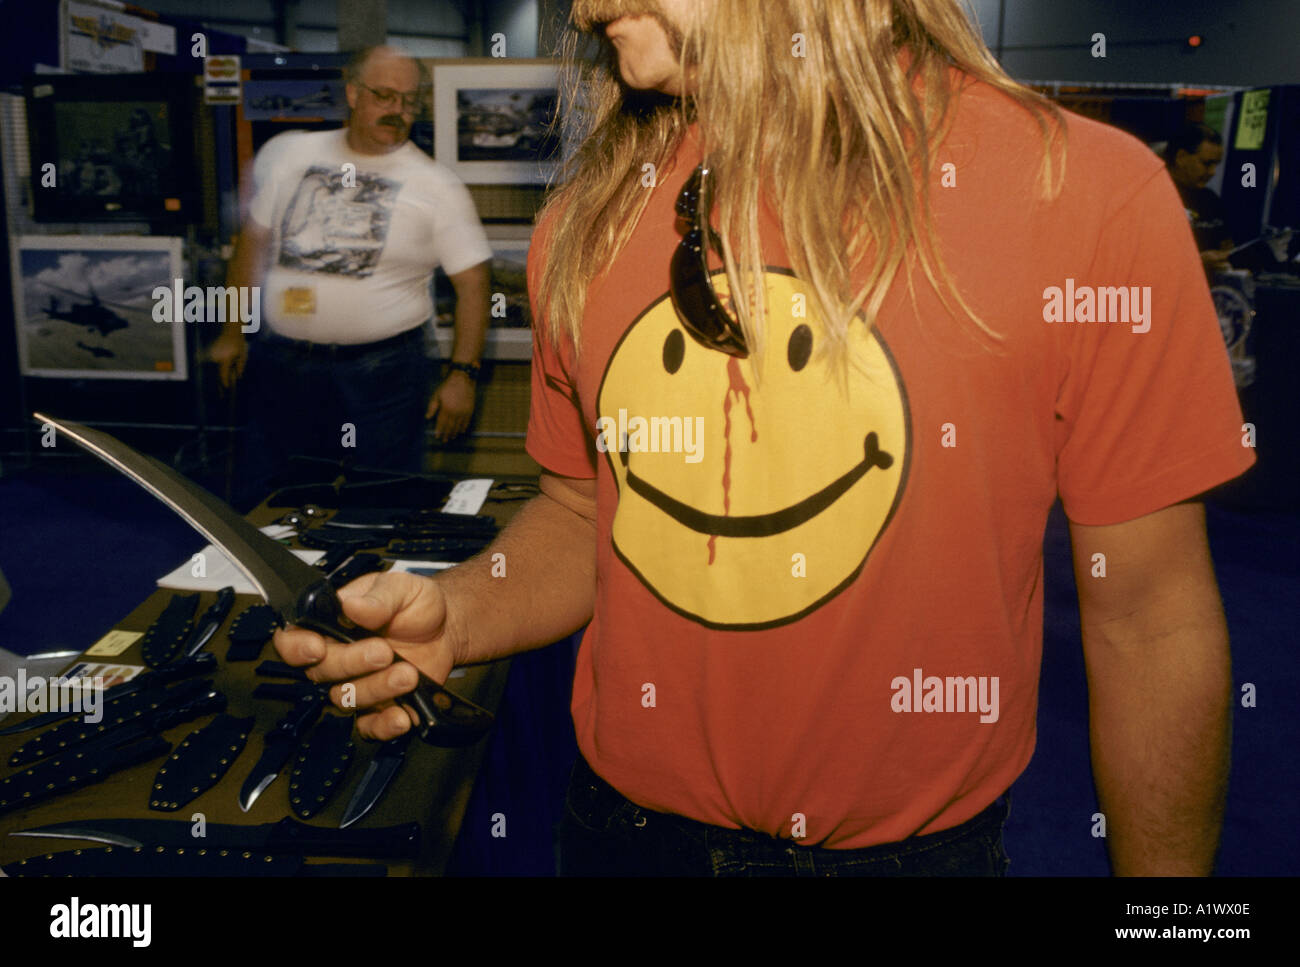 SOLDIERS OF FORTUNE CONVENTIONEER AT ONE OF THE MANY CUSTOM KNIFE STALLS WEARING SMILEY T SHIRT WITH BULLET IN FOREHEAD THE 15TH ANNIVERSARY soldier of fortune magazine annual convention sands hotel las vegas summer 1994 Stock Photo